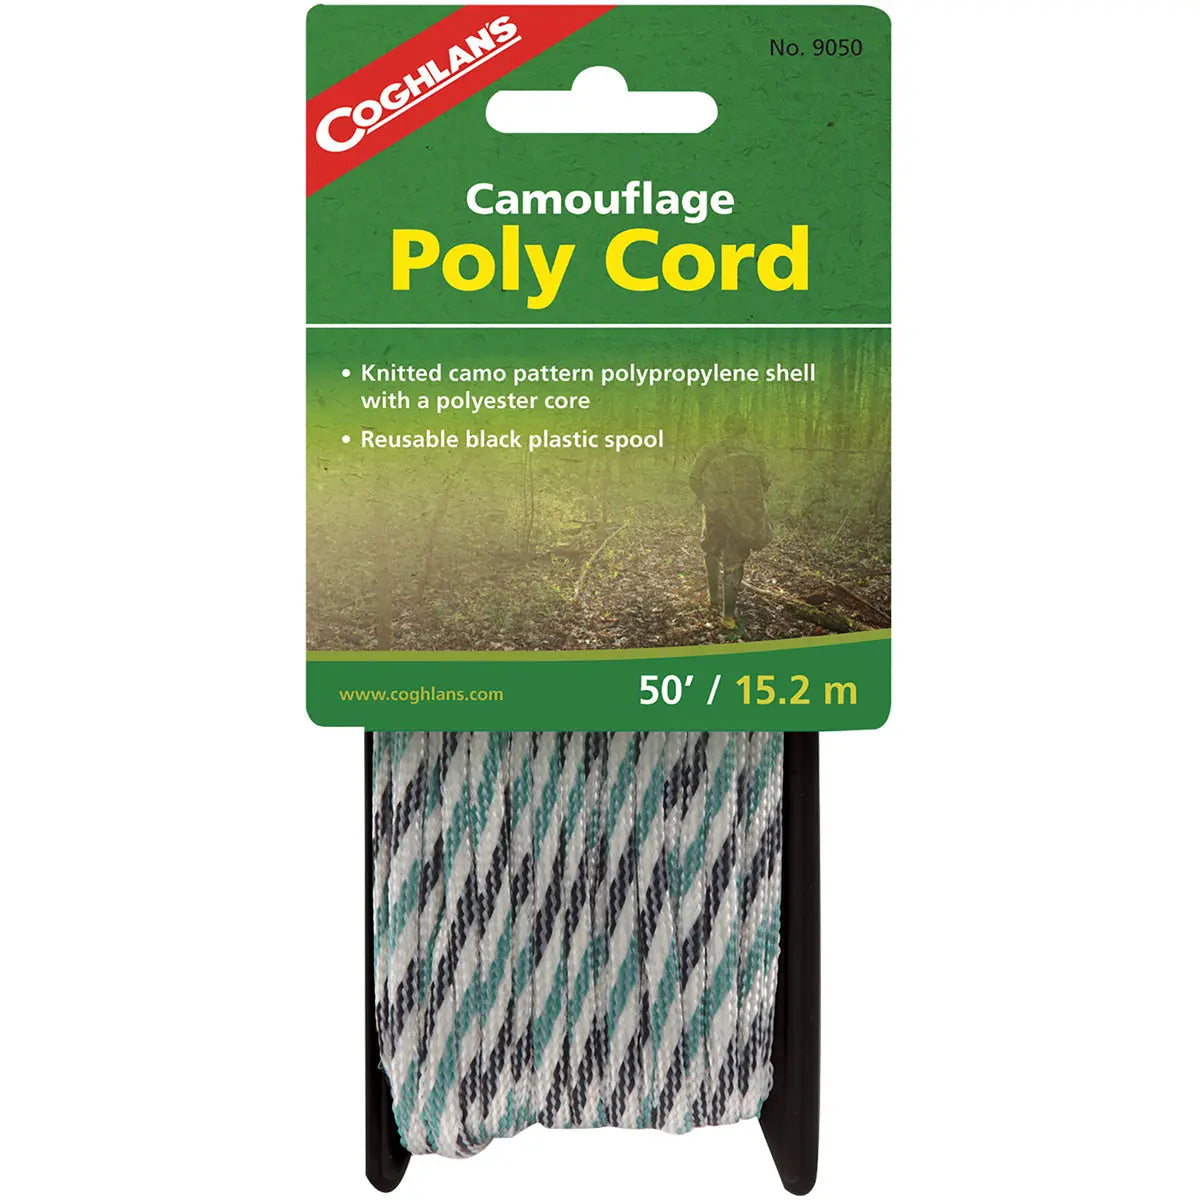 Coghlan's Camouflage Poly Cord, 50' Polypropylene Rope, Camping Survival Tool Coghlan's